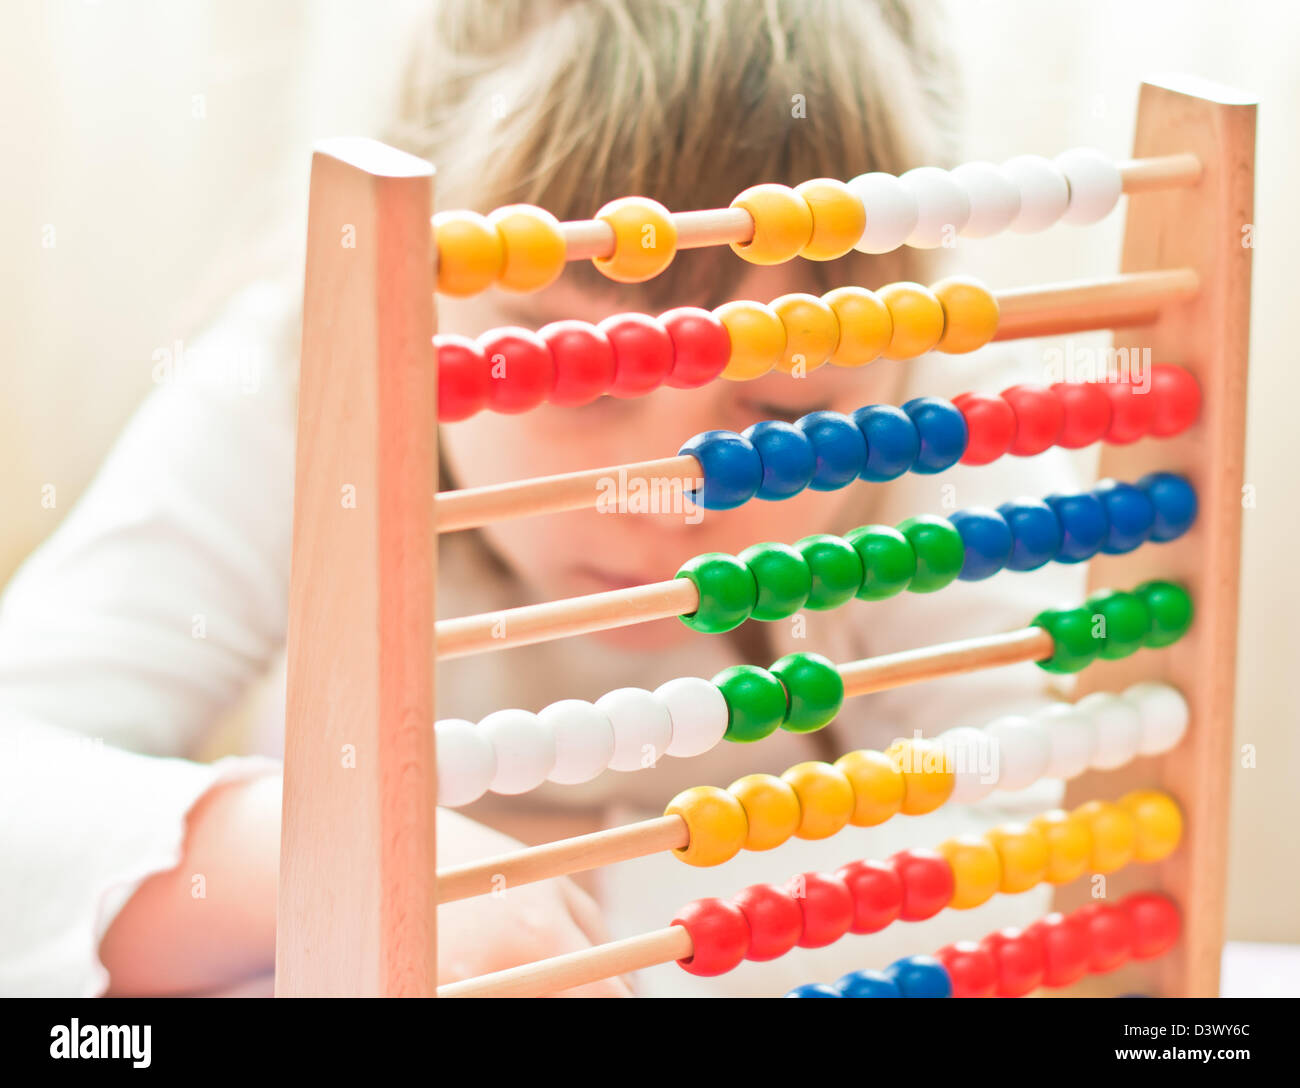 Business, Learning, Child, Color Image, early learning, Finance, Lifestyles, Childhood, People, Work Tool, Concepts And Ideas, Stock Photo